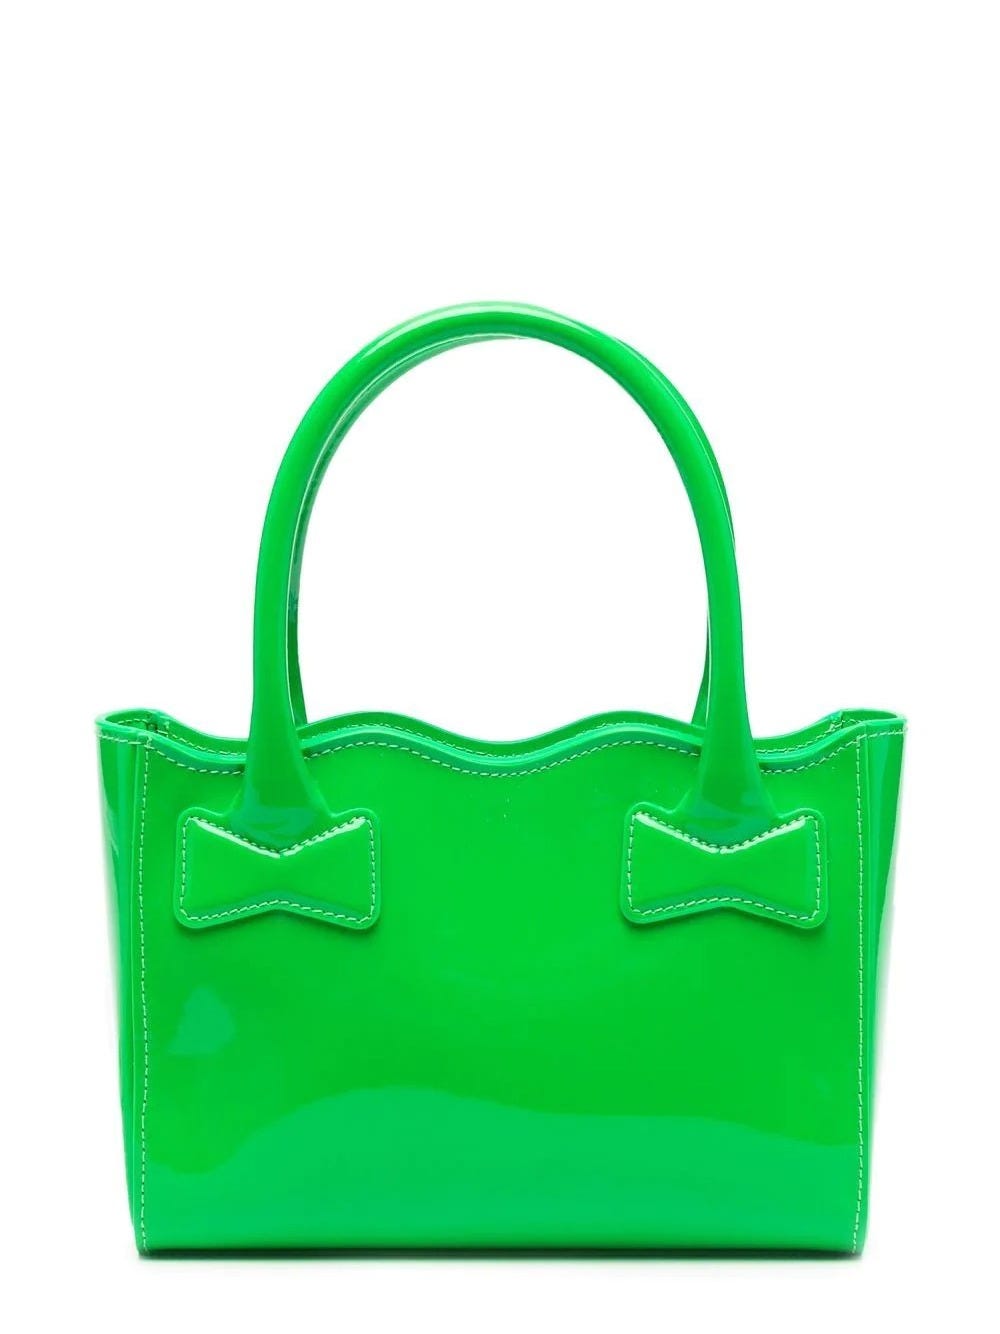 MACH & MACH FLUO GREEN TOTE BAG WITH SCALLOPED EDGE AND BOWS ON HANDLE